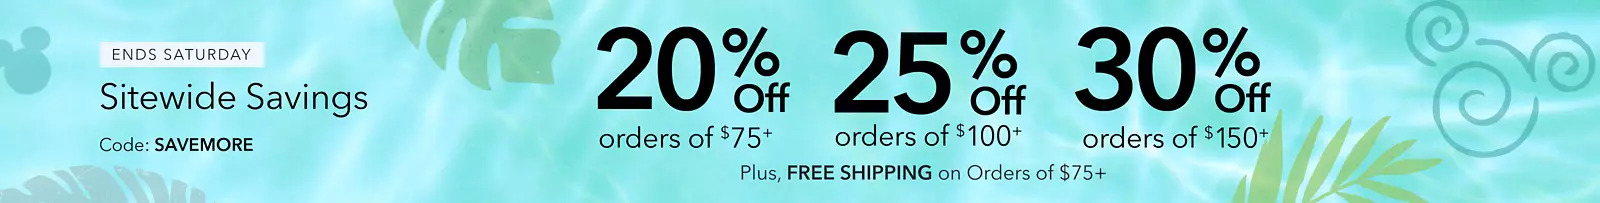 Shop Disney Online Up to 30% Off plus Free Shipping on $75.00 or More With Code SAVEMORE